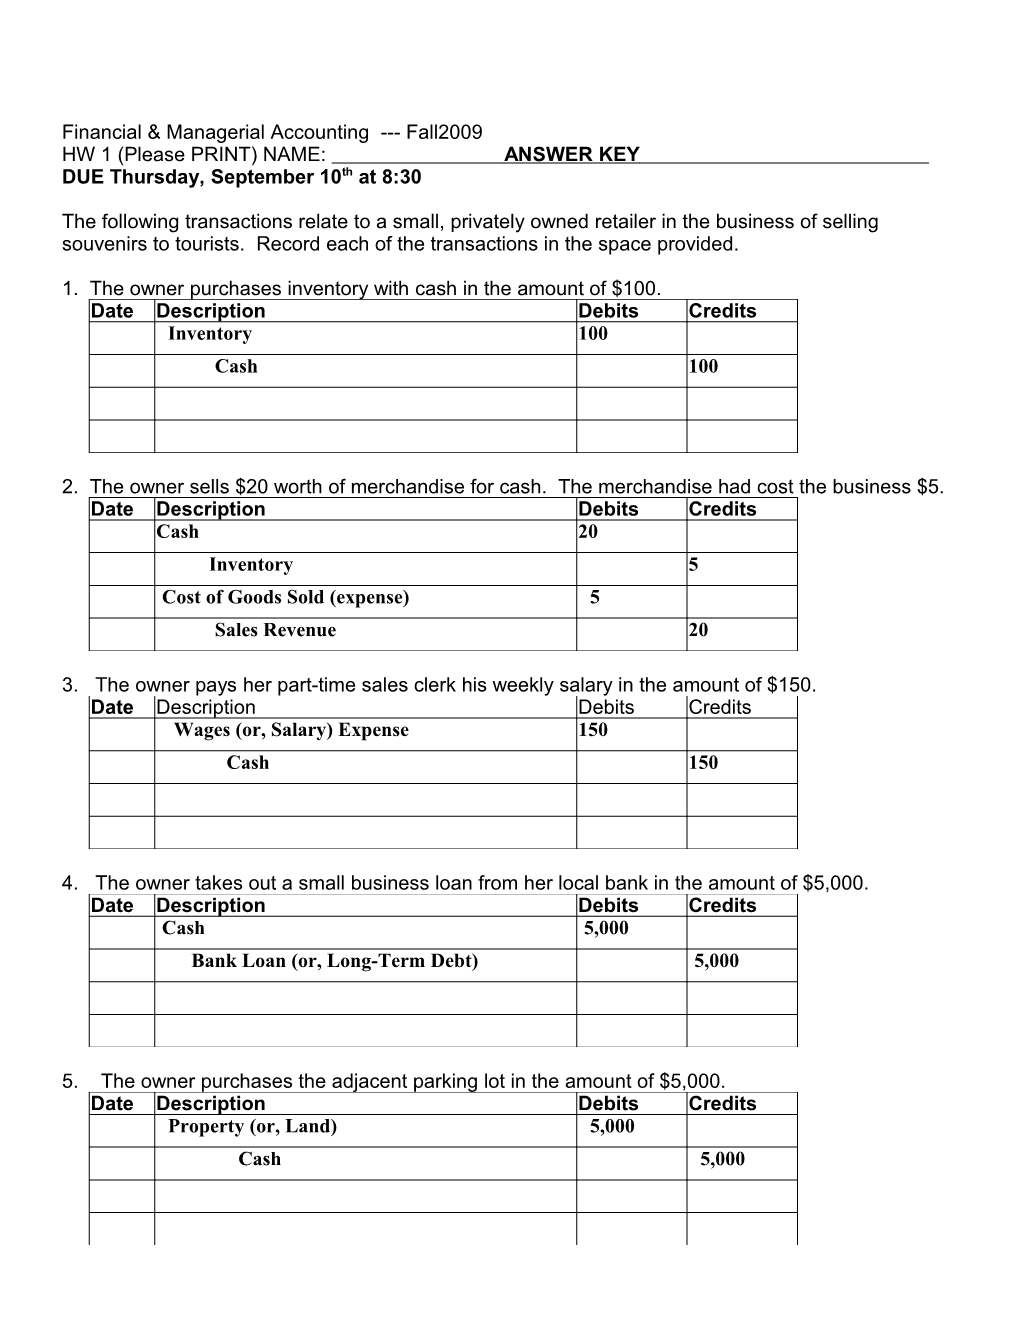 Financial & Managerial Accounting Spring 2008 Homework #2 Due 2/5